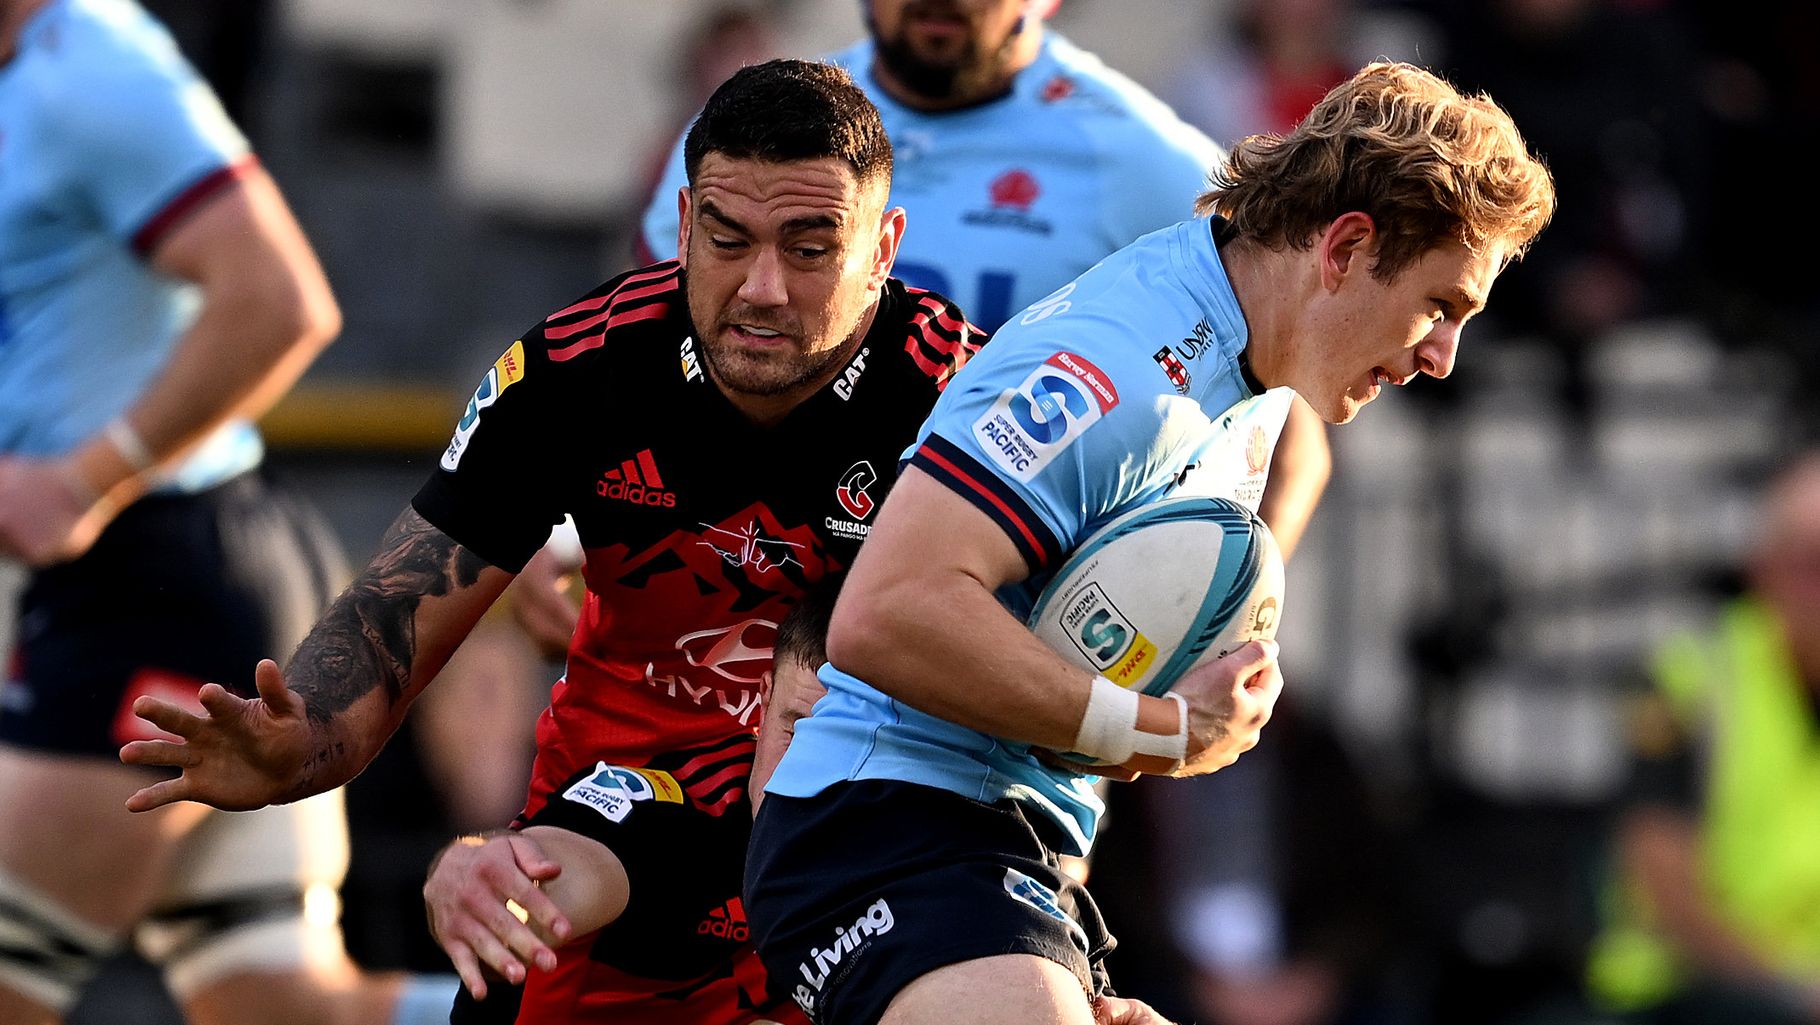 Max Jorgensen charges forward during the round 14 Super Rugby Pacific match between Crusaders and NSW Waratahs.